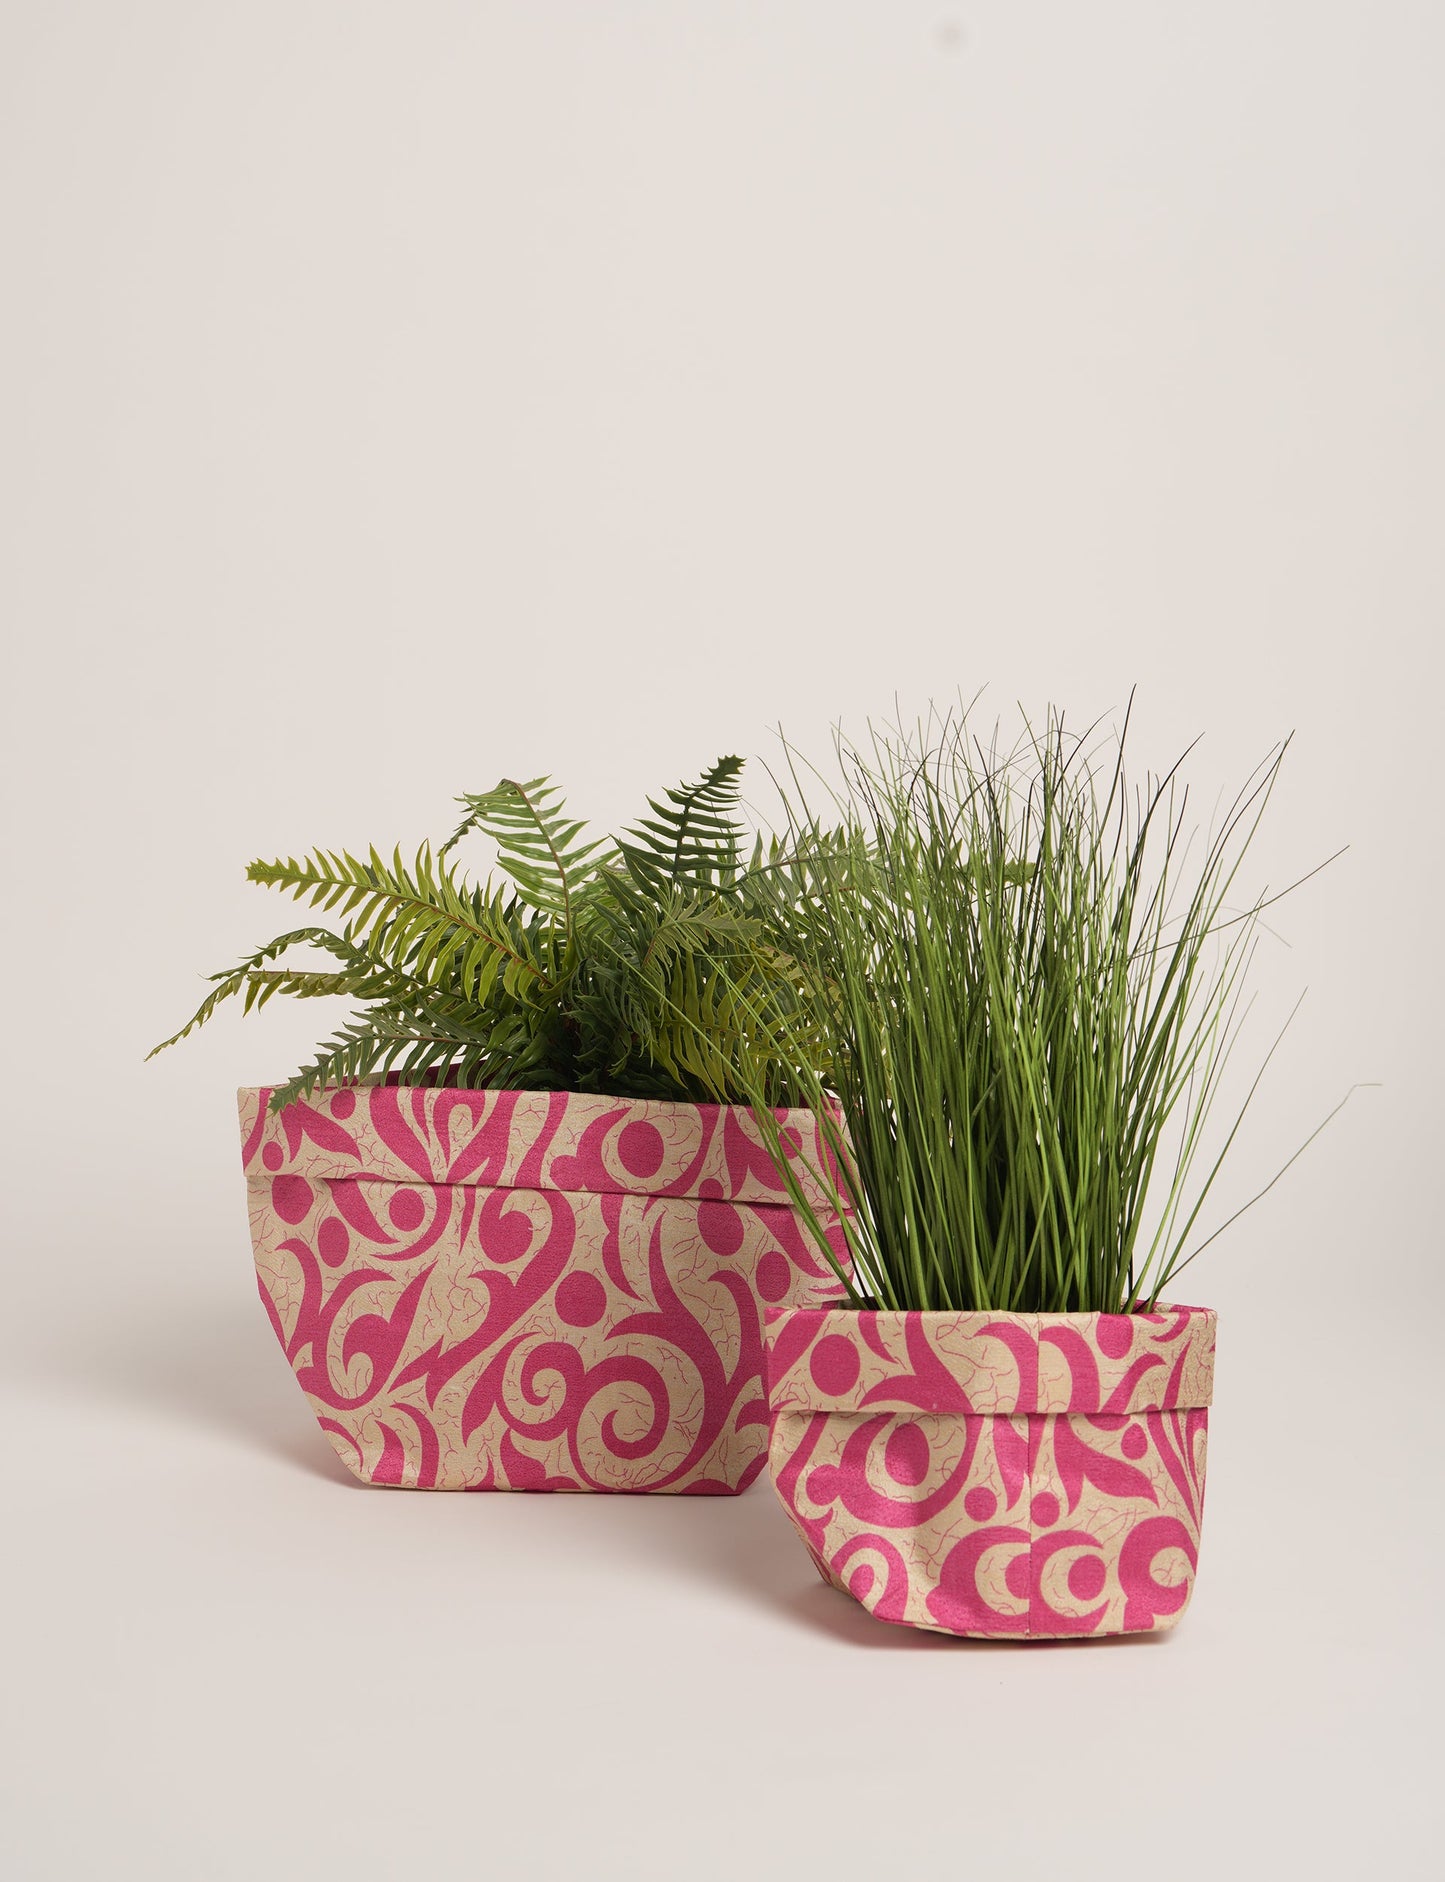 Upgrade your plant aesthetics sustainably with our PLANT POT COVER SET – two handmade covers crafted from preloved saris. Ethical and green, these covers bring eco-friendly charm to your plants and your space.